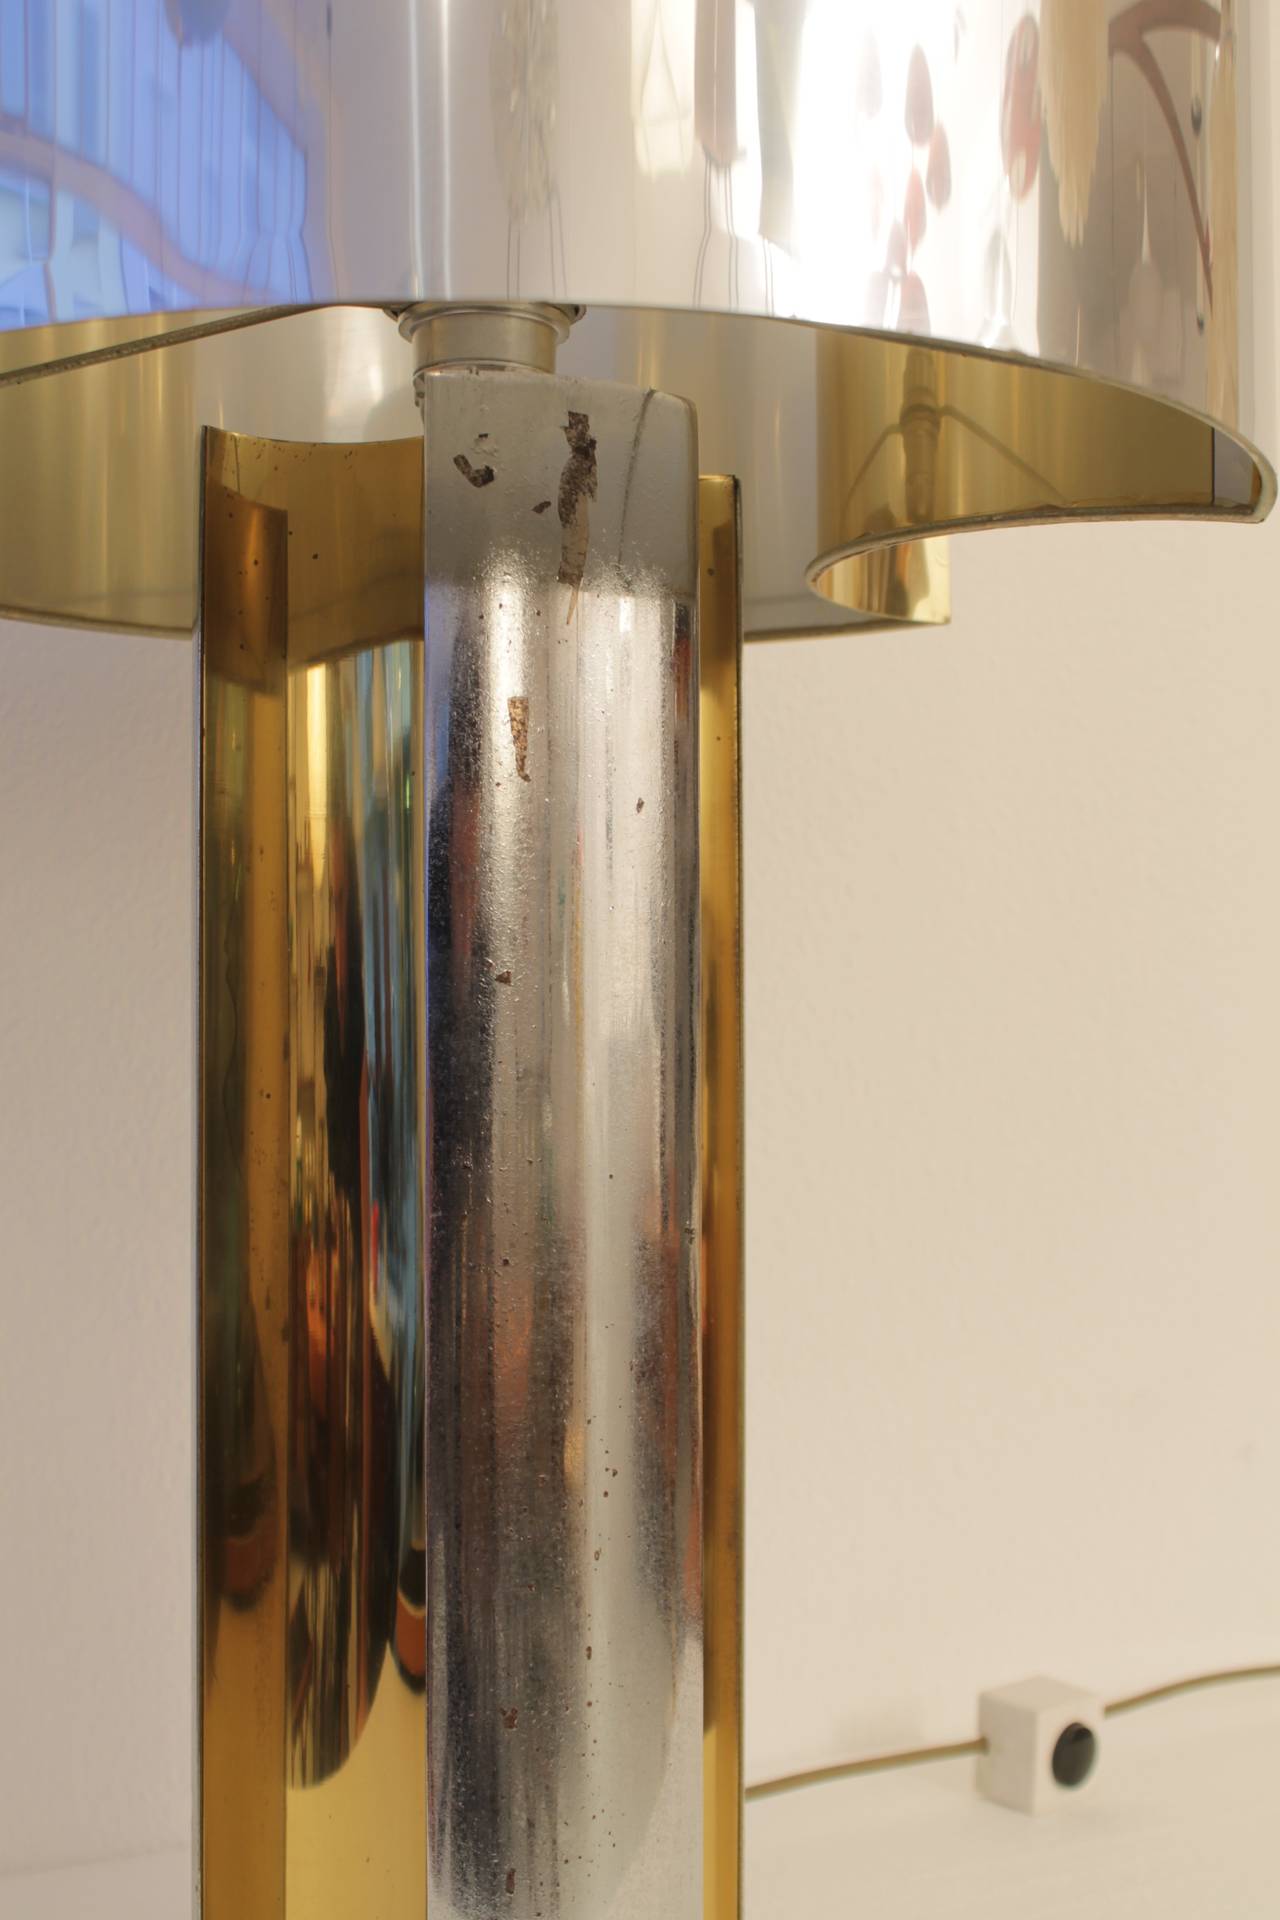 willy rizzo lamp